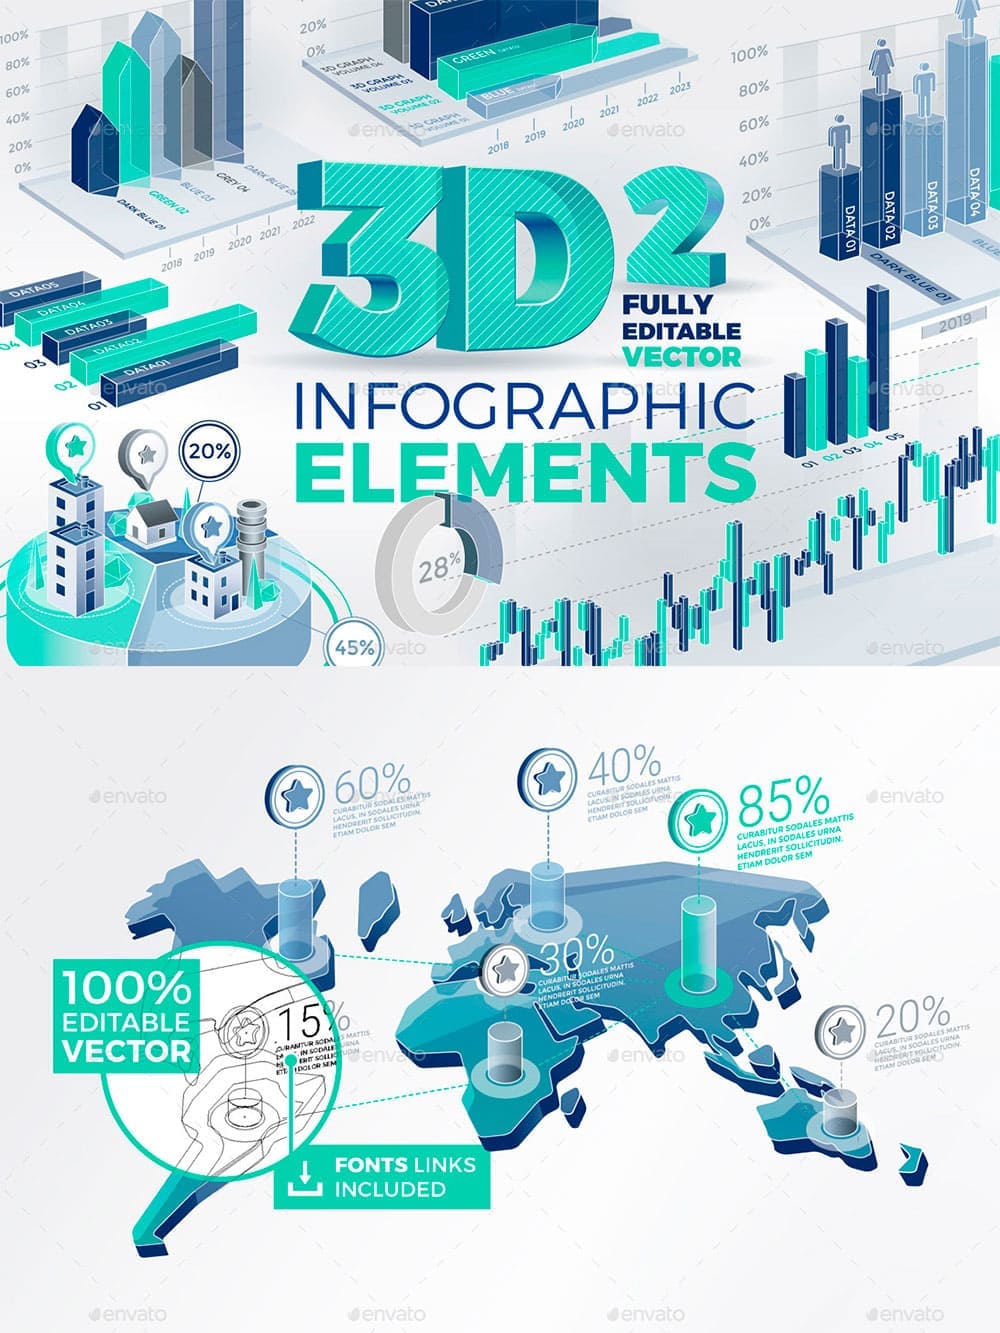 3d corporate infographic elements 2, picture for pinterest.